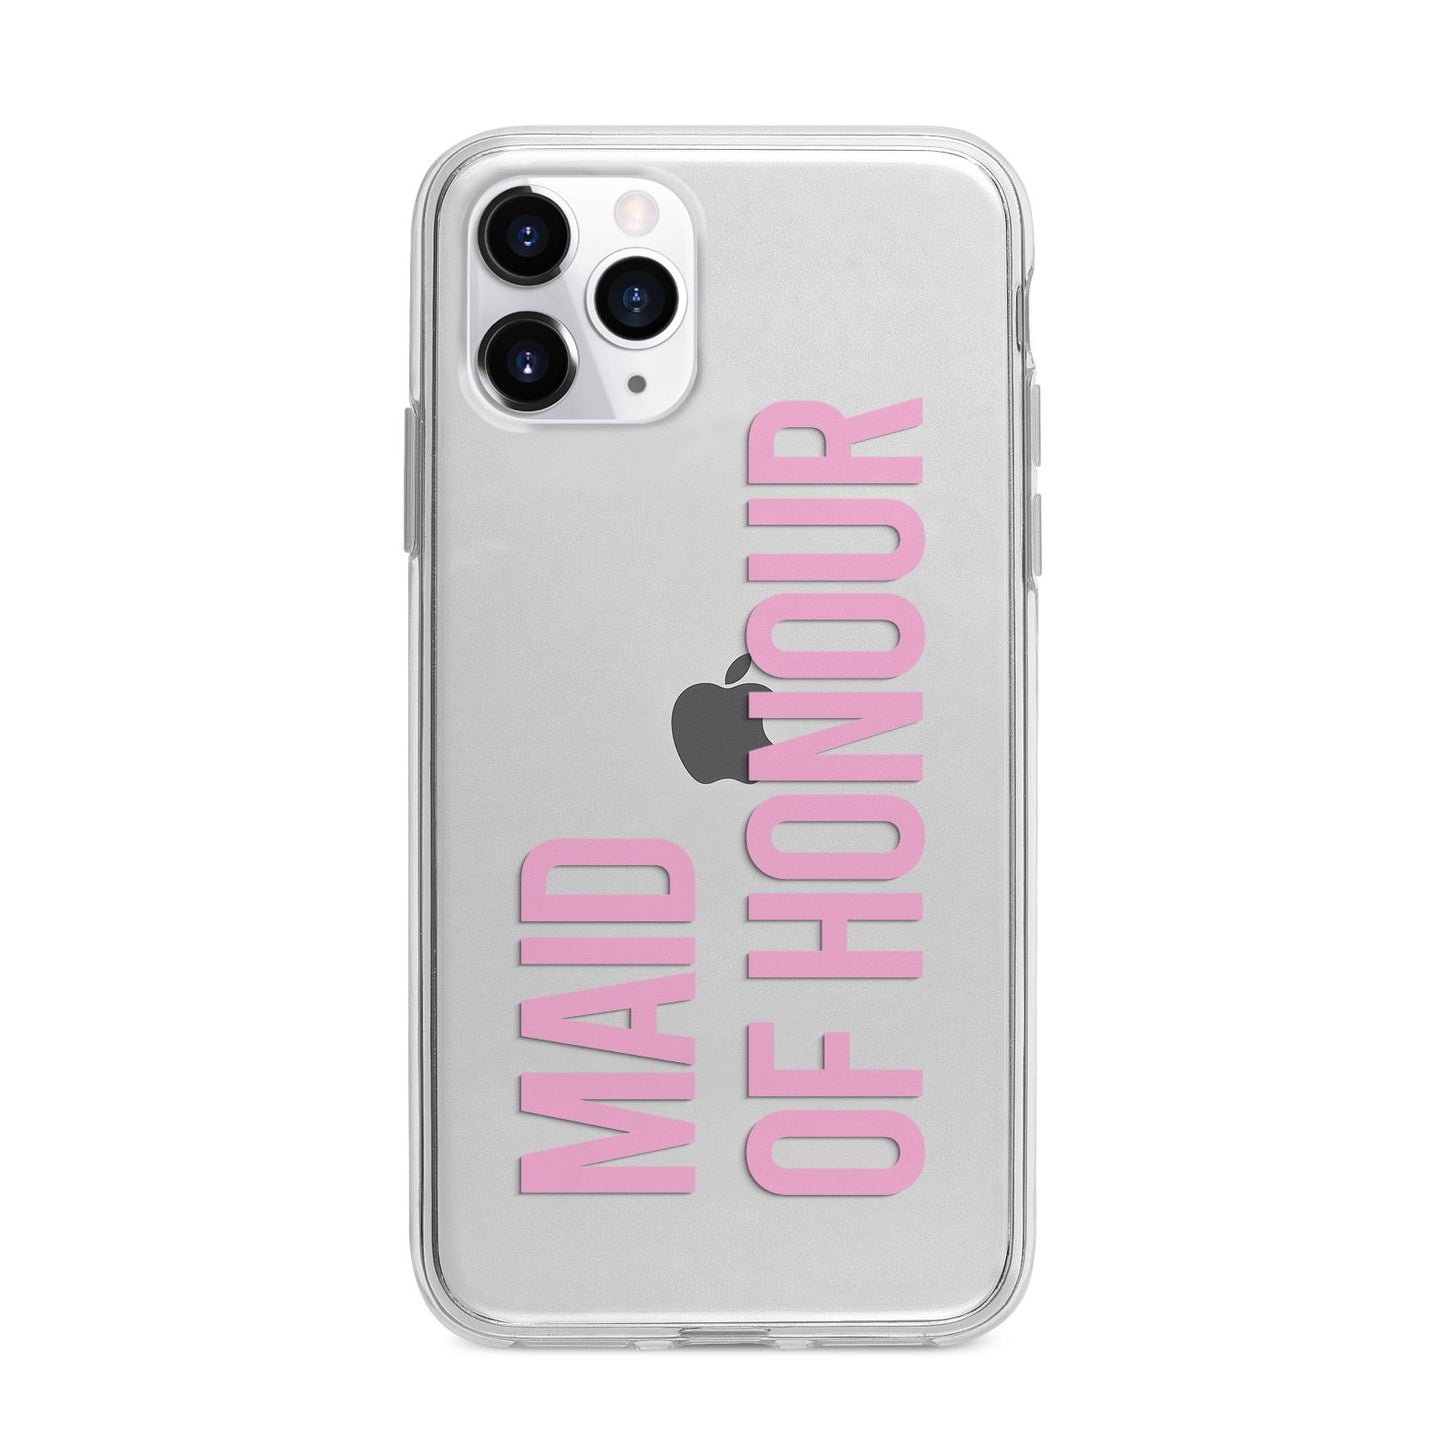 Maid of Honour Apple iPhone 11 Pro in Silver with Bumper Case